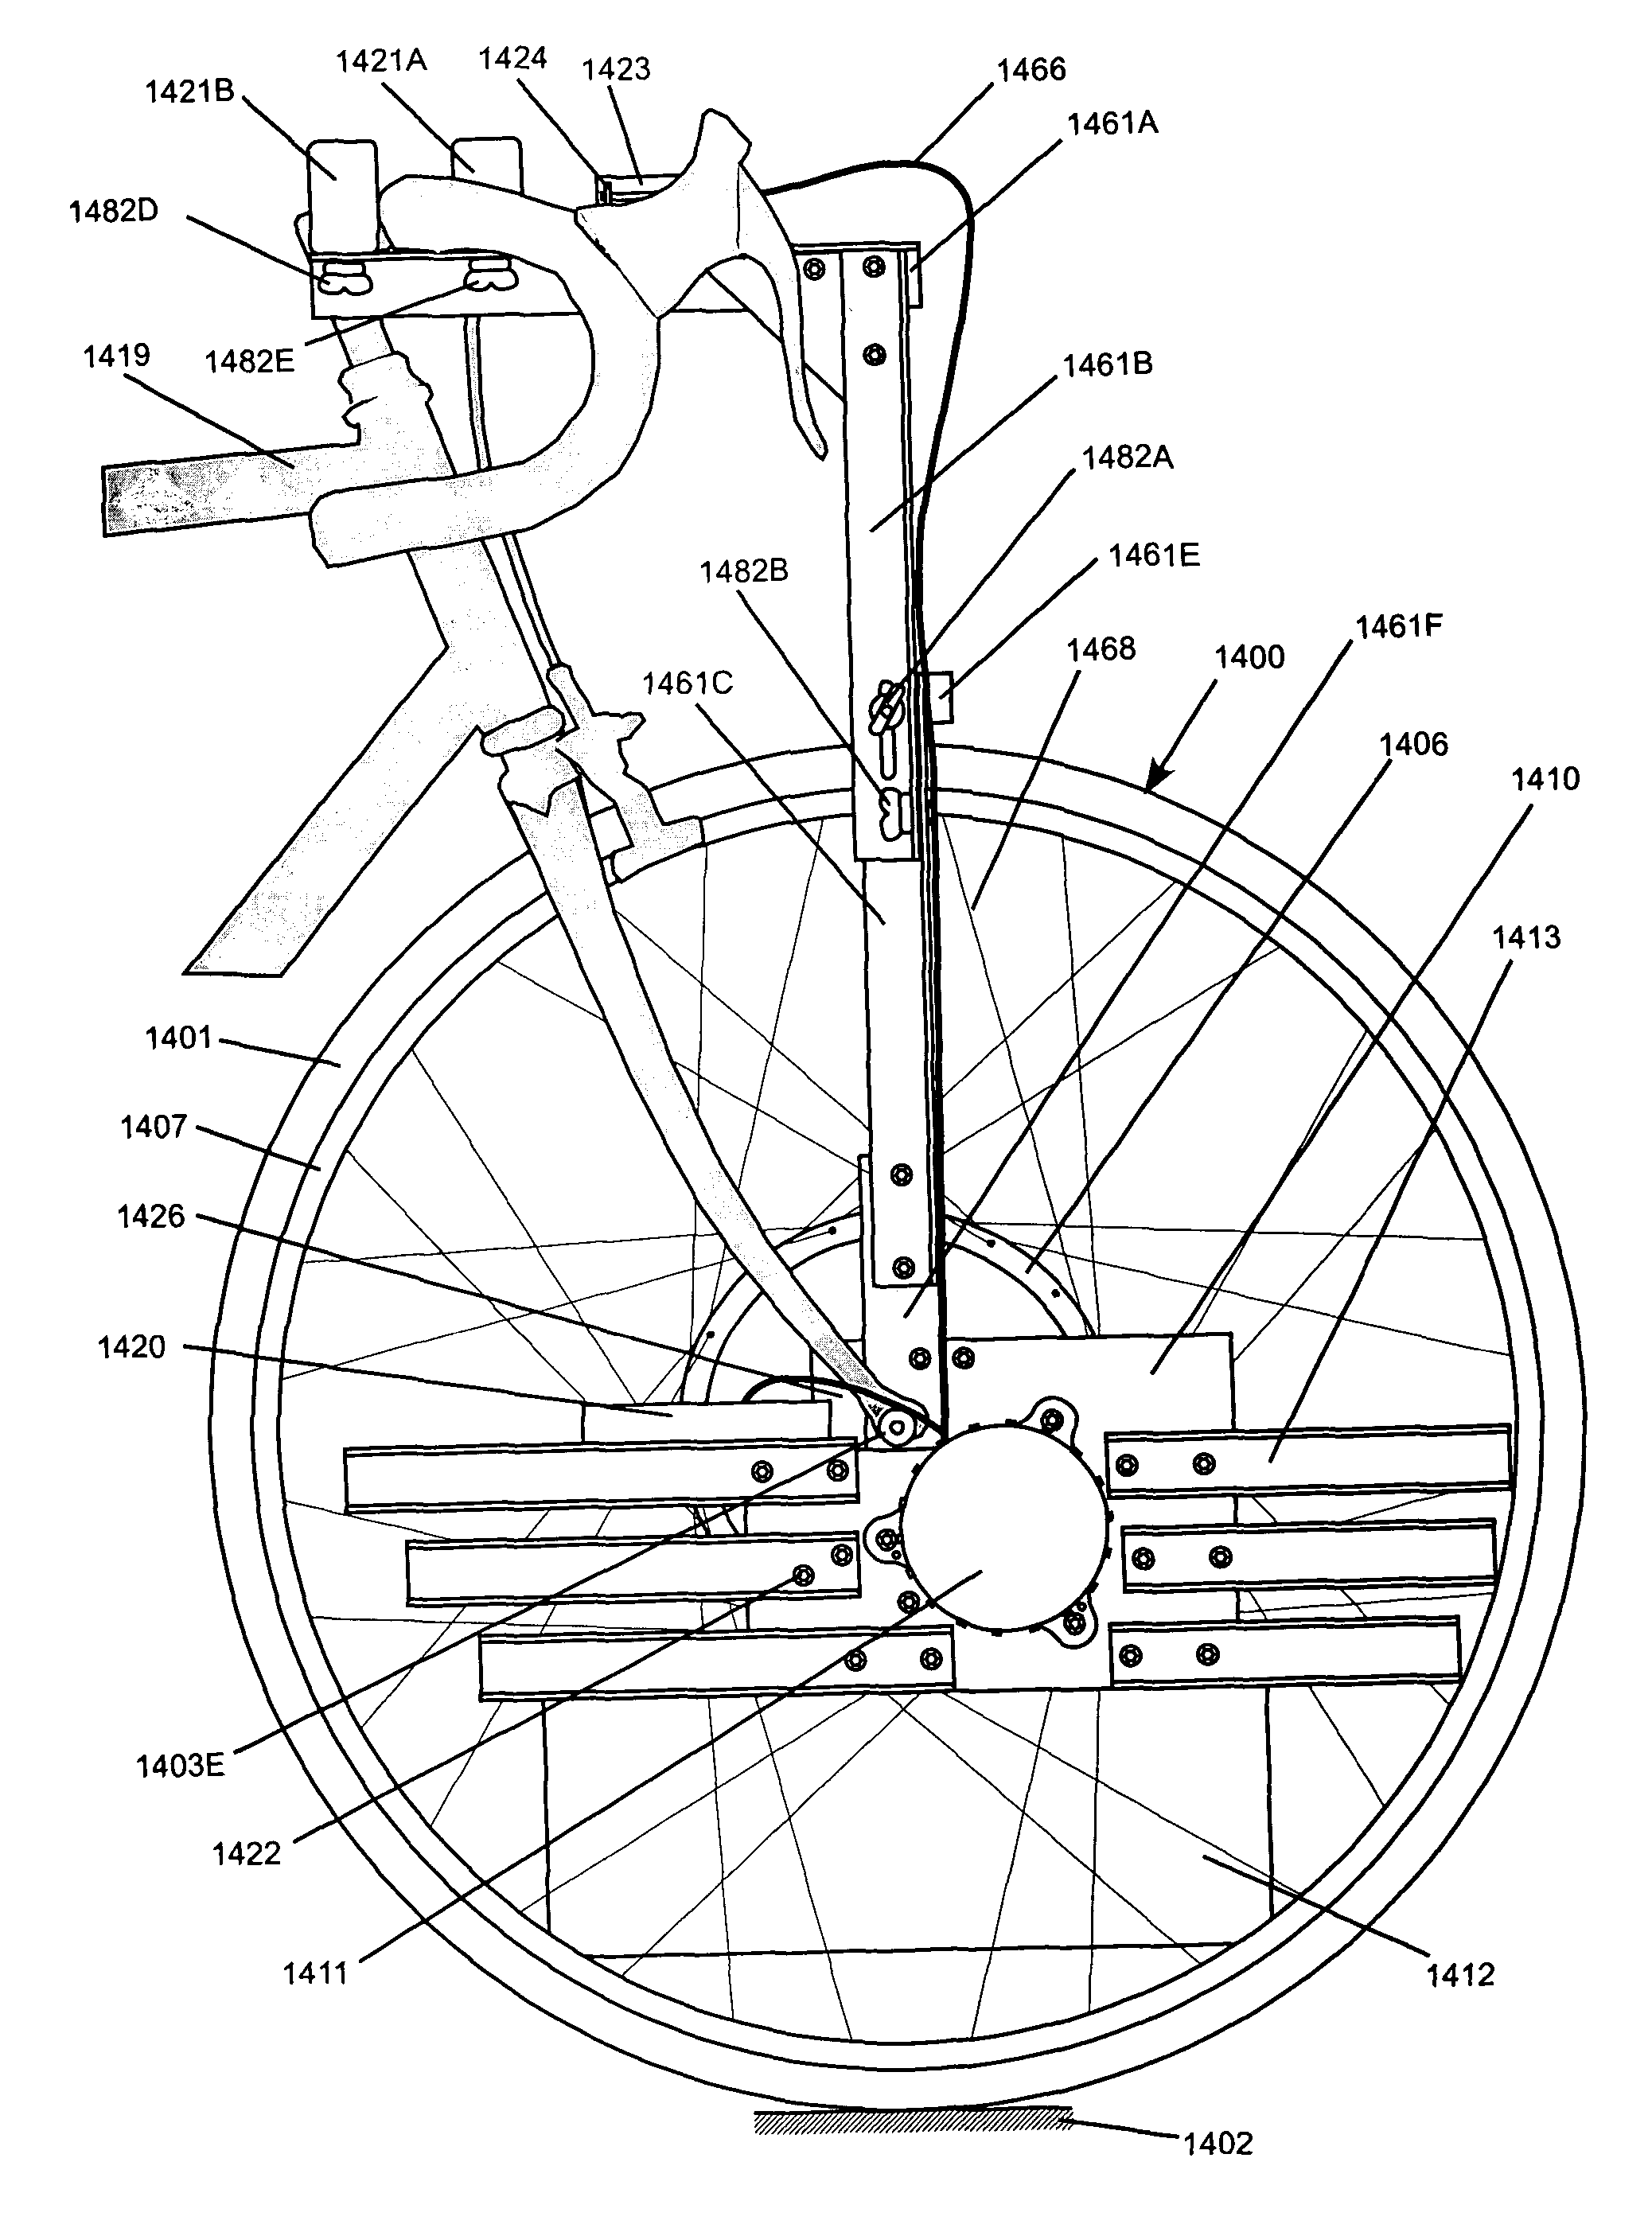 Self-propelled wheel for bicycles and similar vehicles